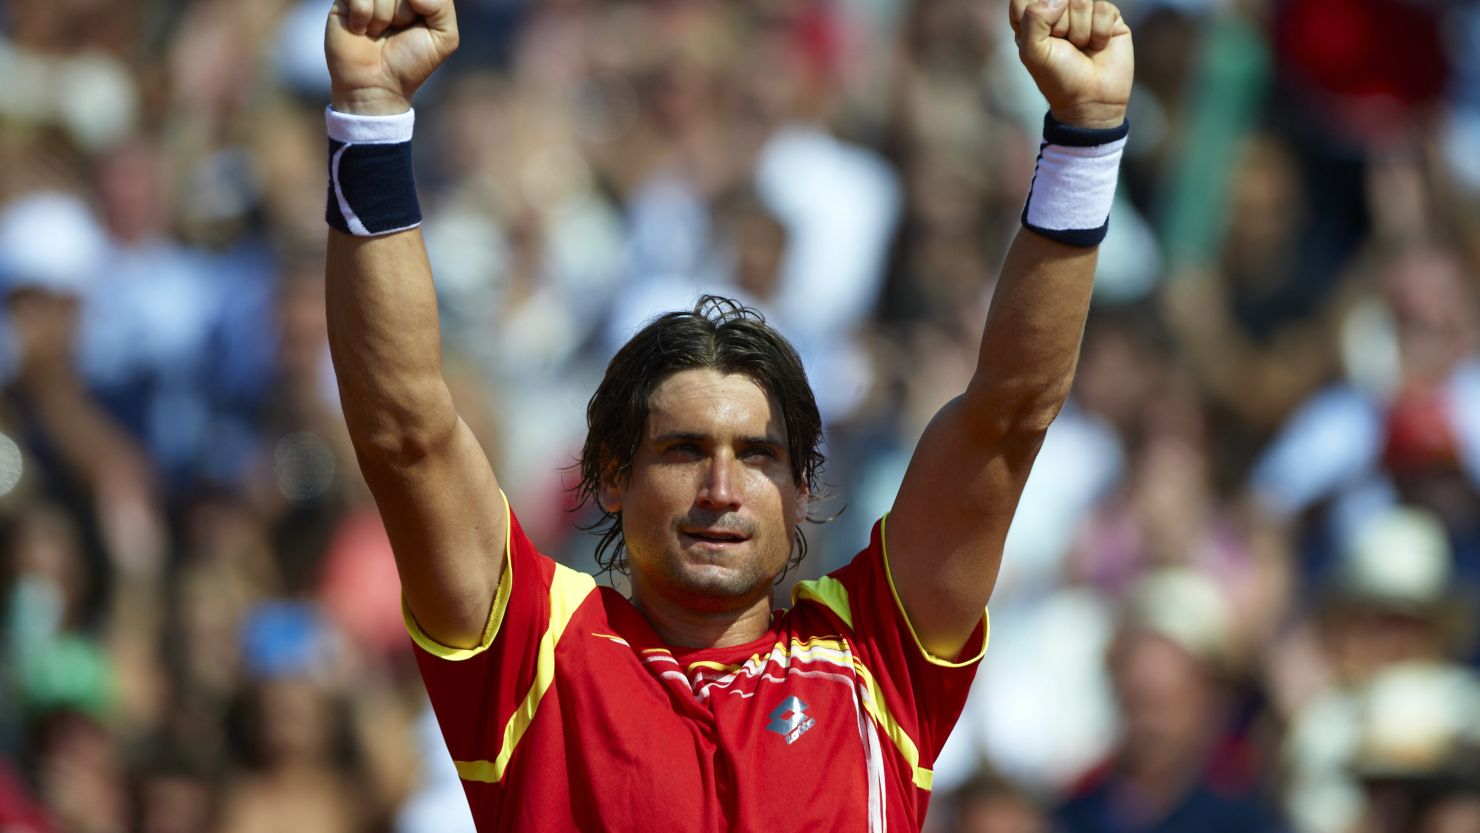 Spain's David Ferrer has won all 16 of his Davis Cup singles matches on clay.